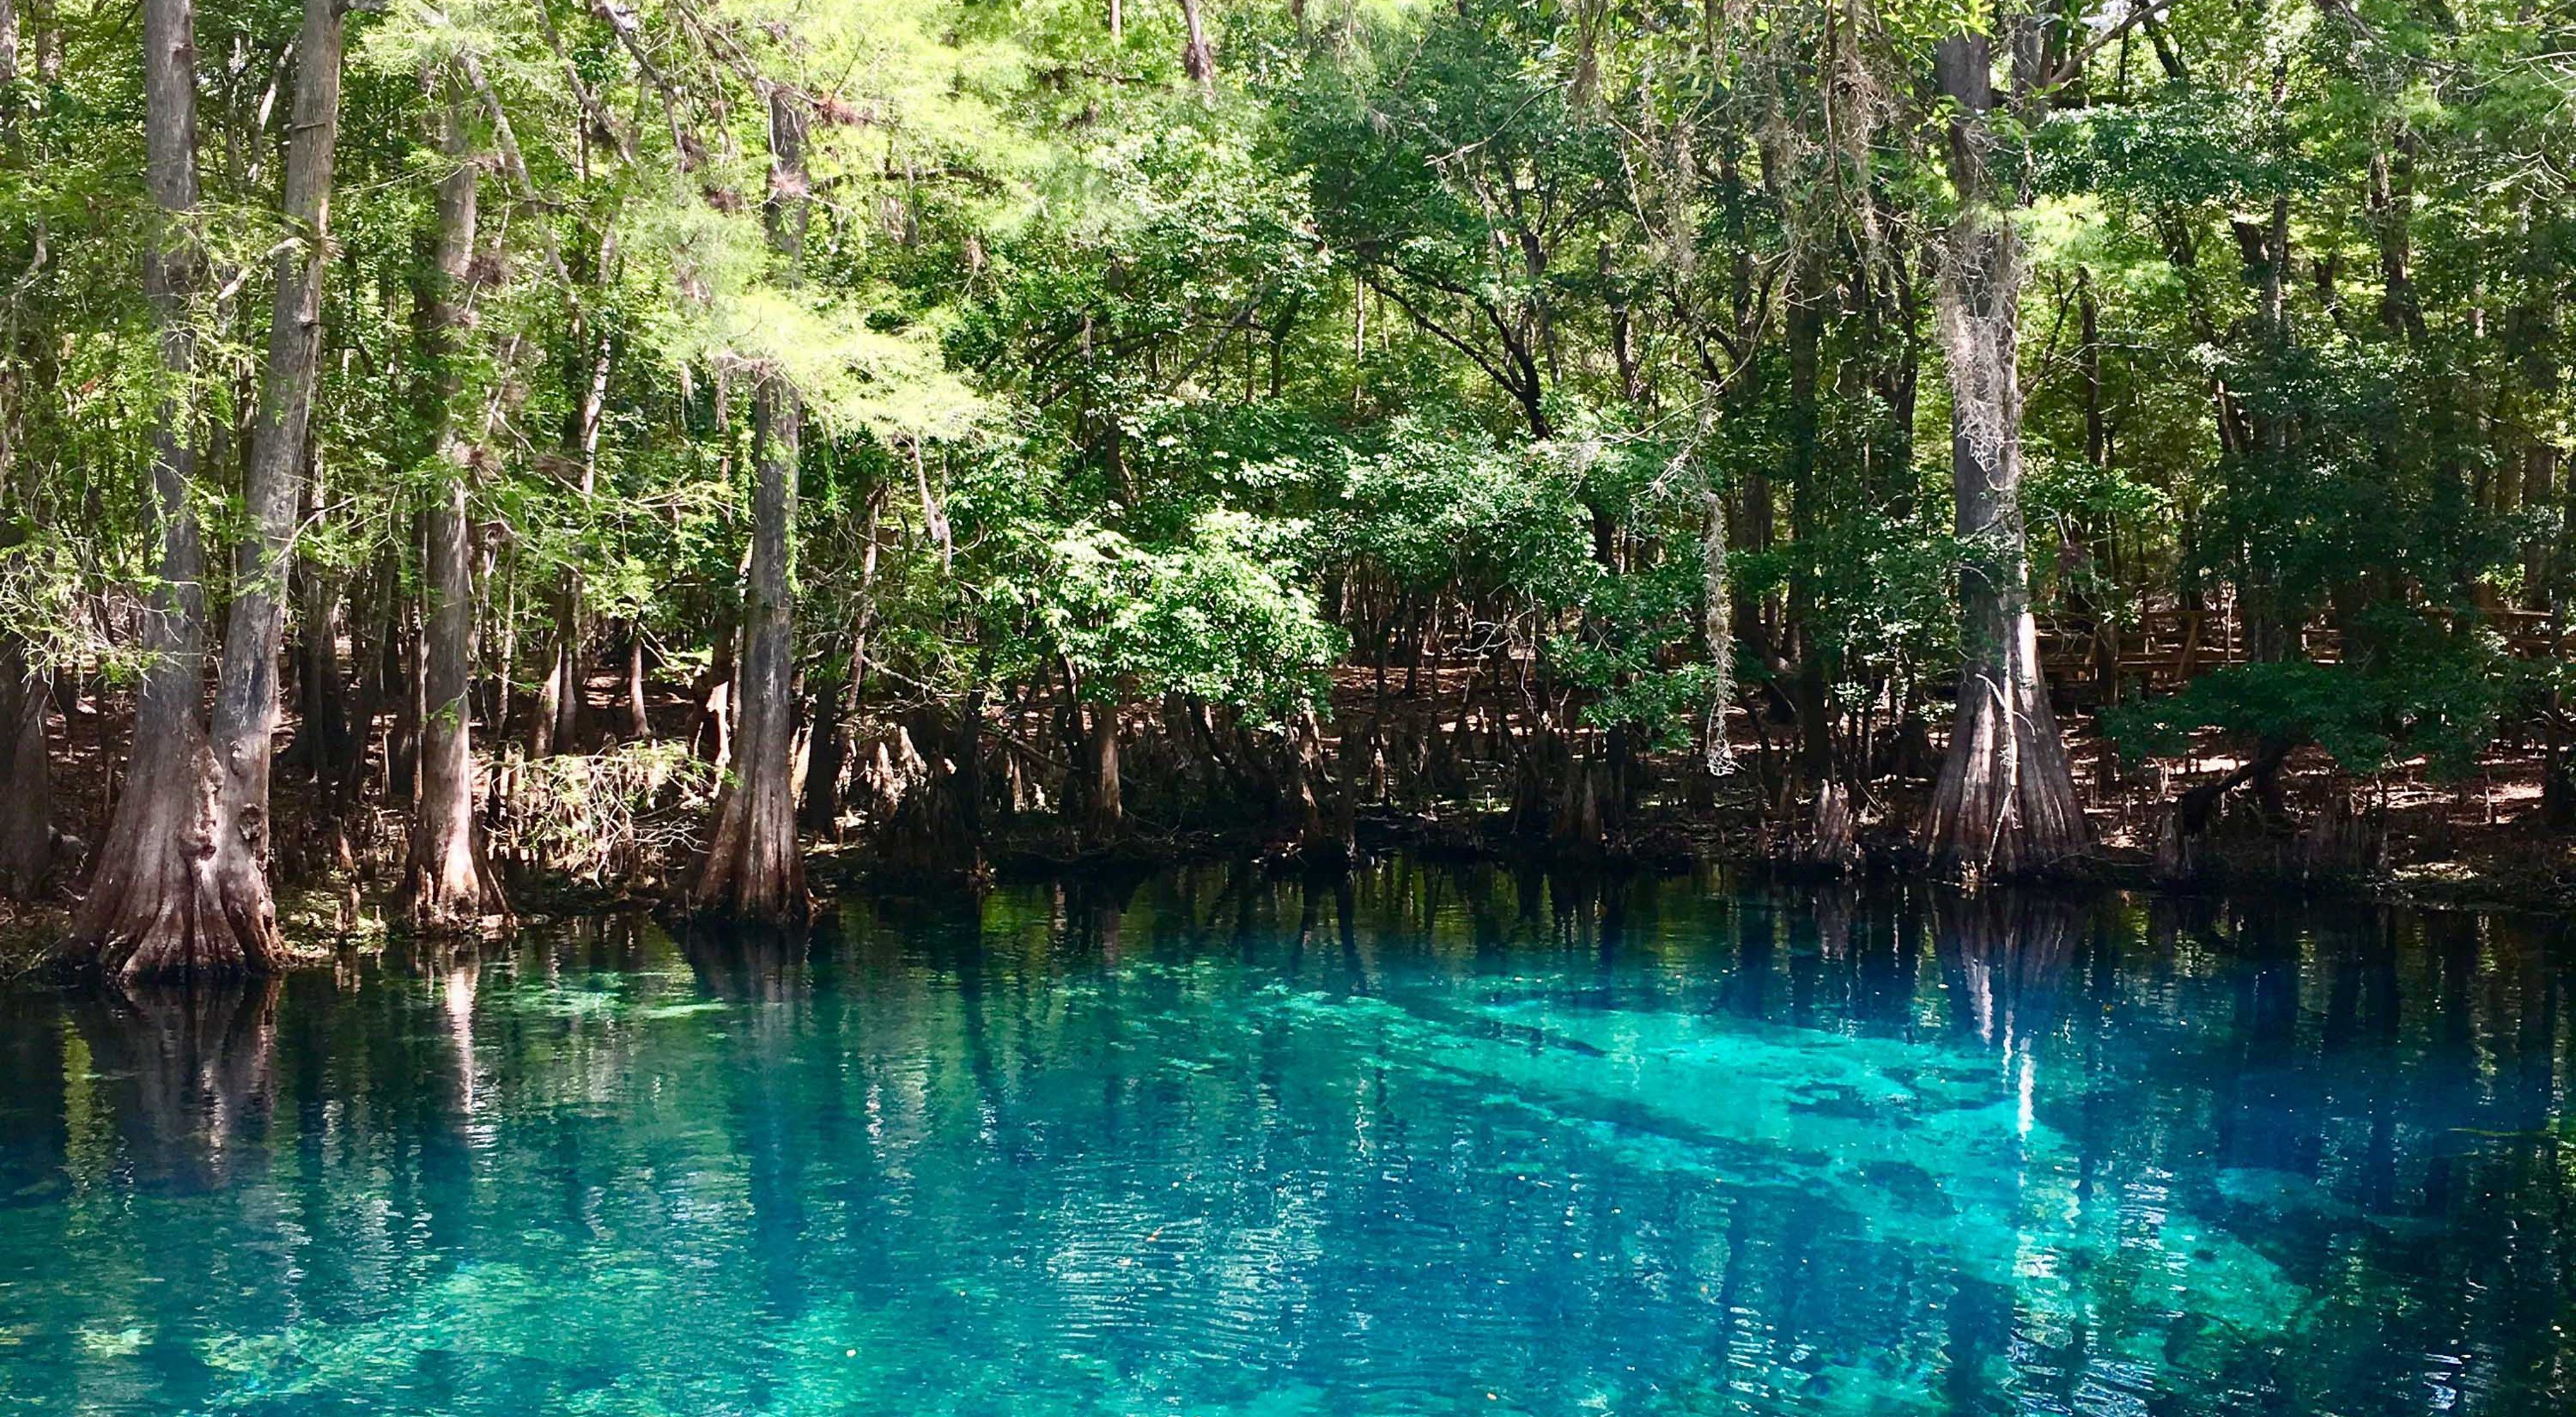 A view from Manatee Springs and the bright blue water looking toward the banks lined with cypress trees and forest in the background.